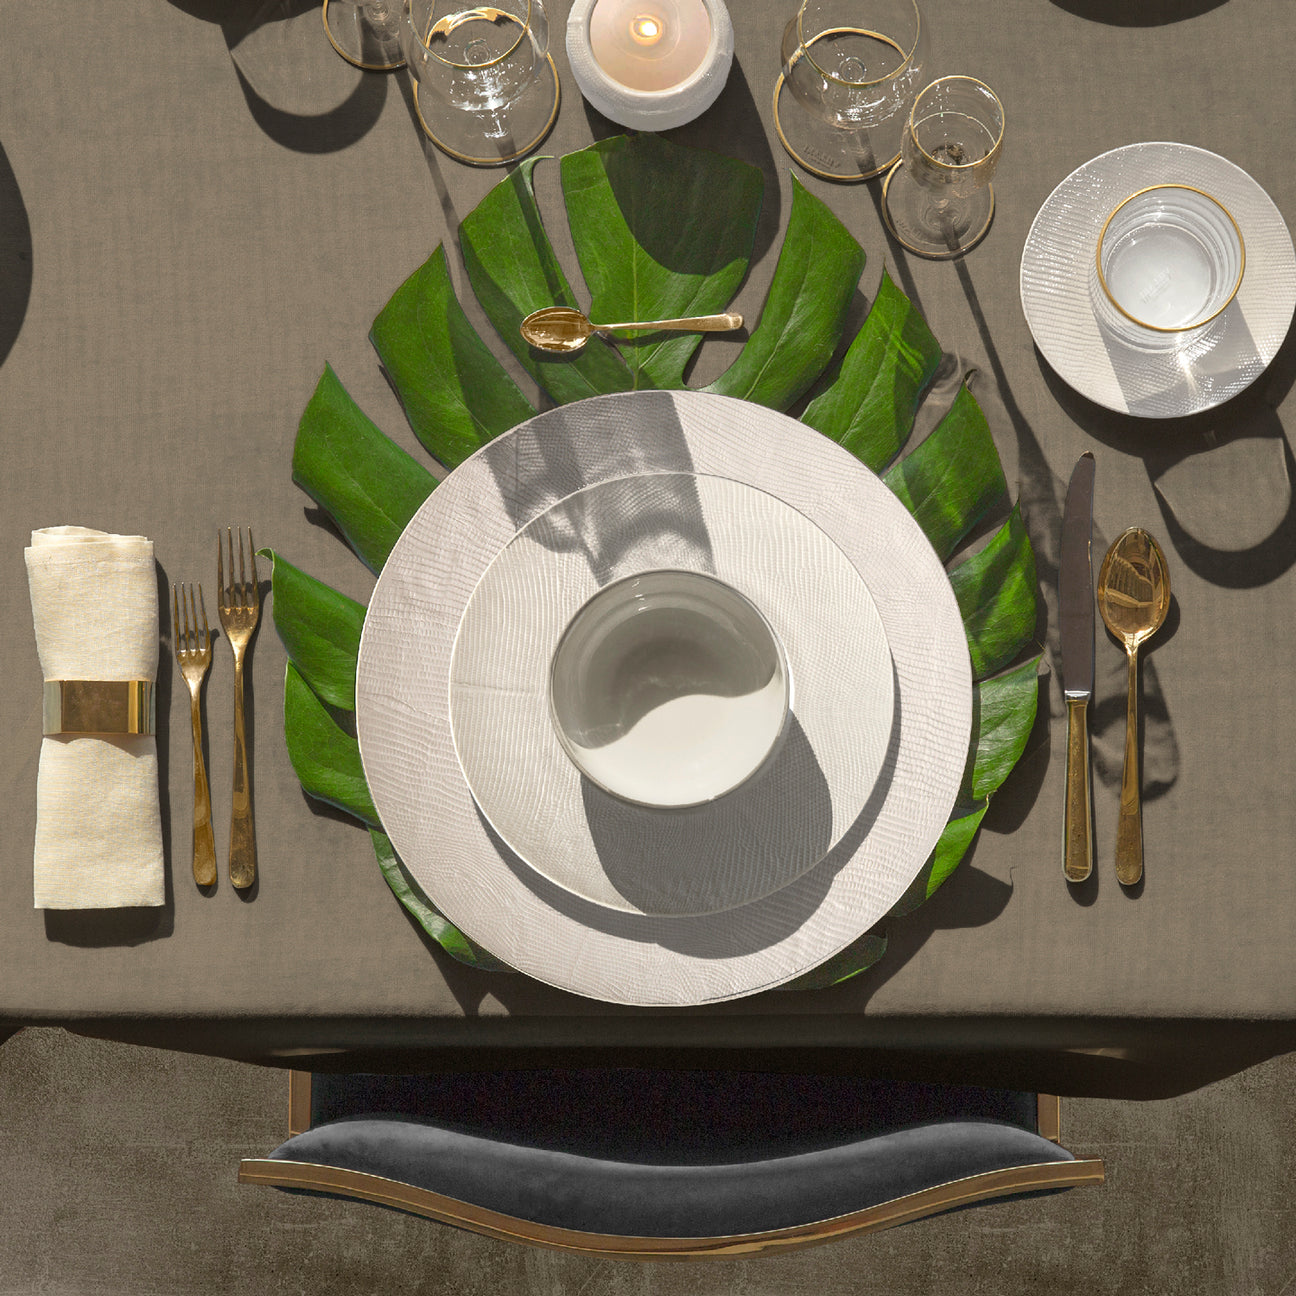 Dining & Tea \ Dining \ Compose your own set \ Dining Sets